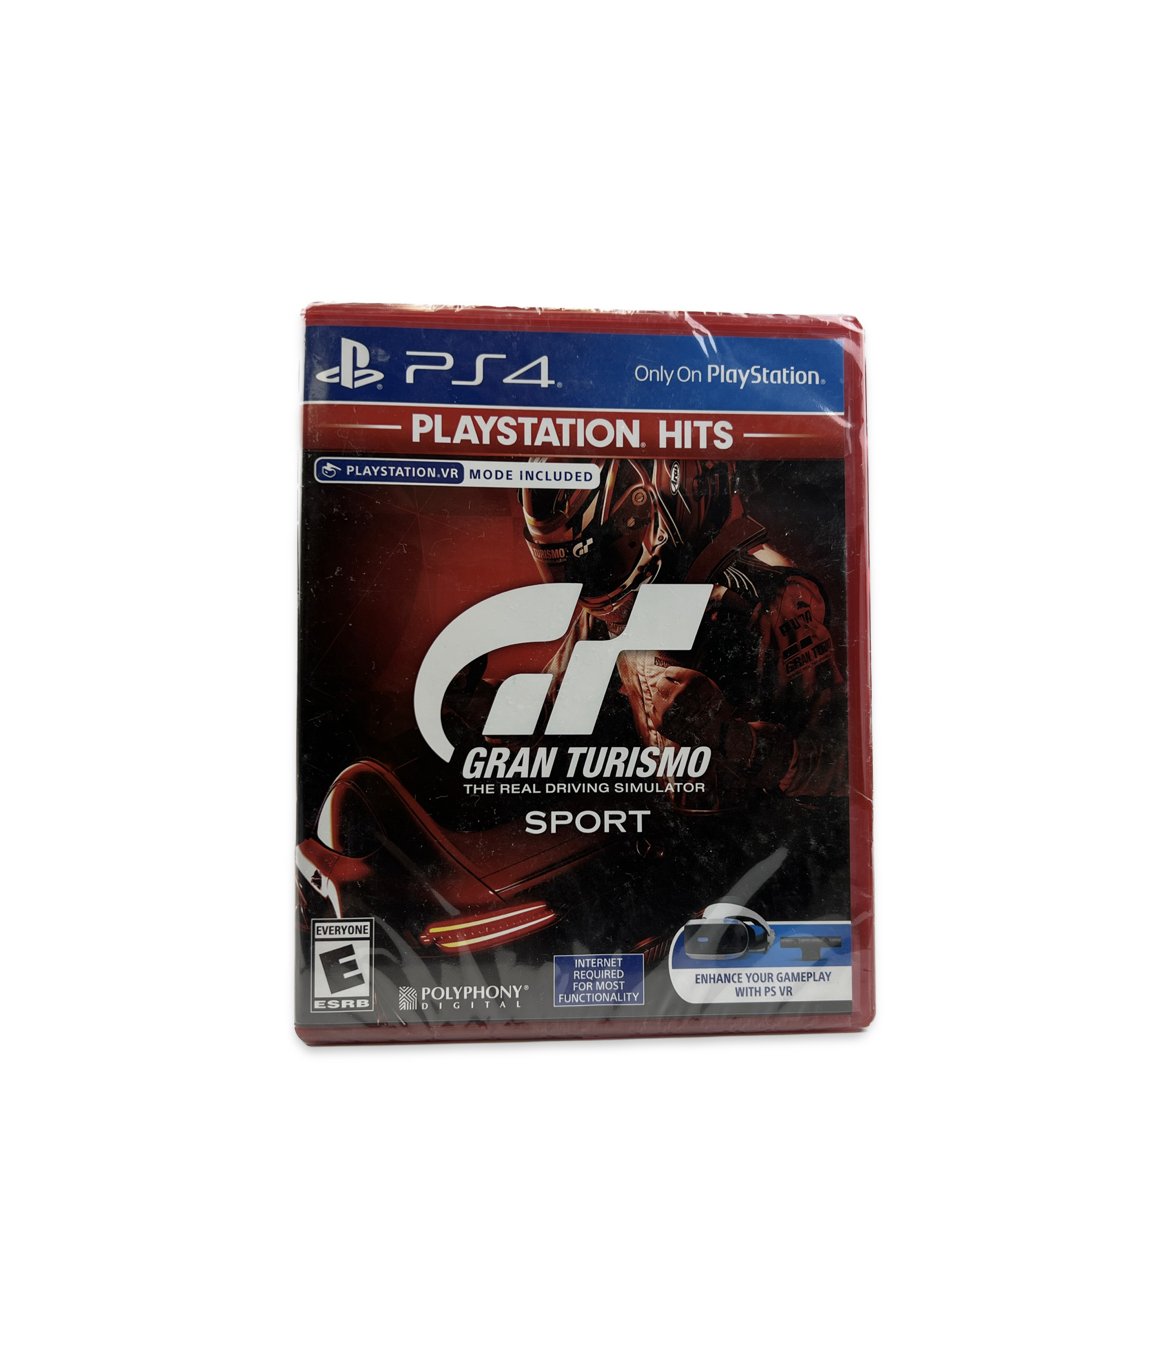 Gran Turismo Playstation 4 Gameplay — Fashion Cents Consignment & Stores in and Strasburg, PA